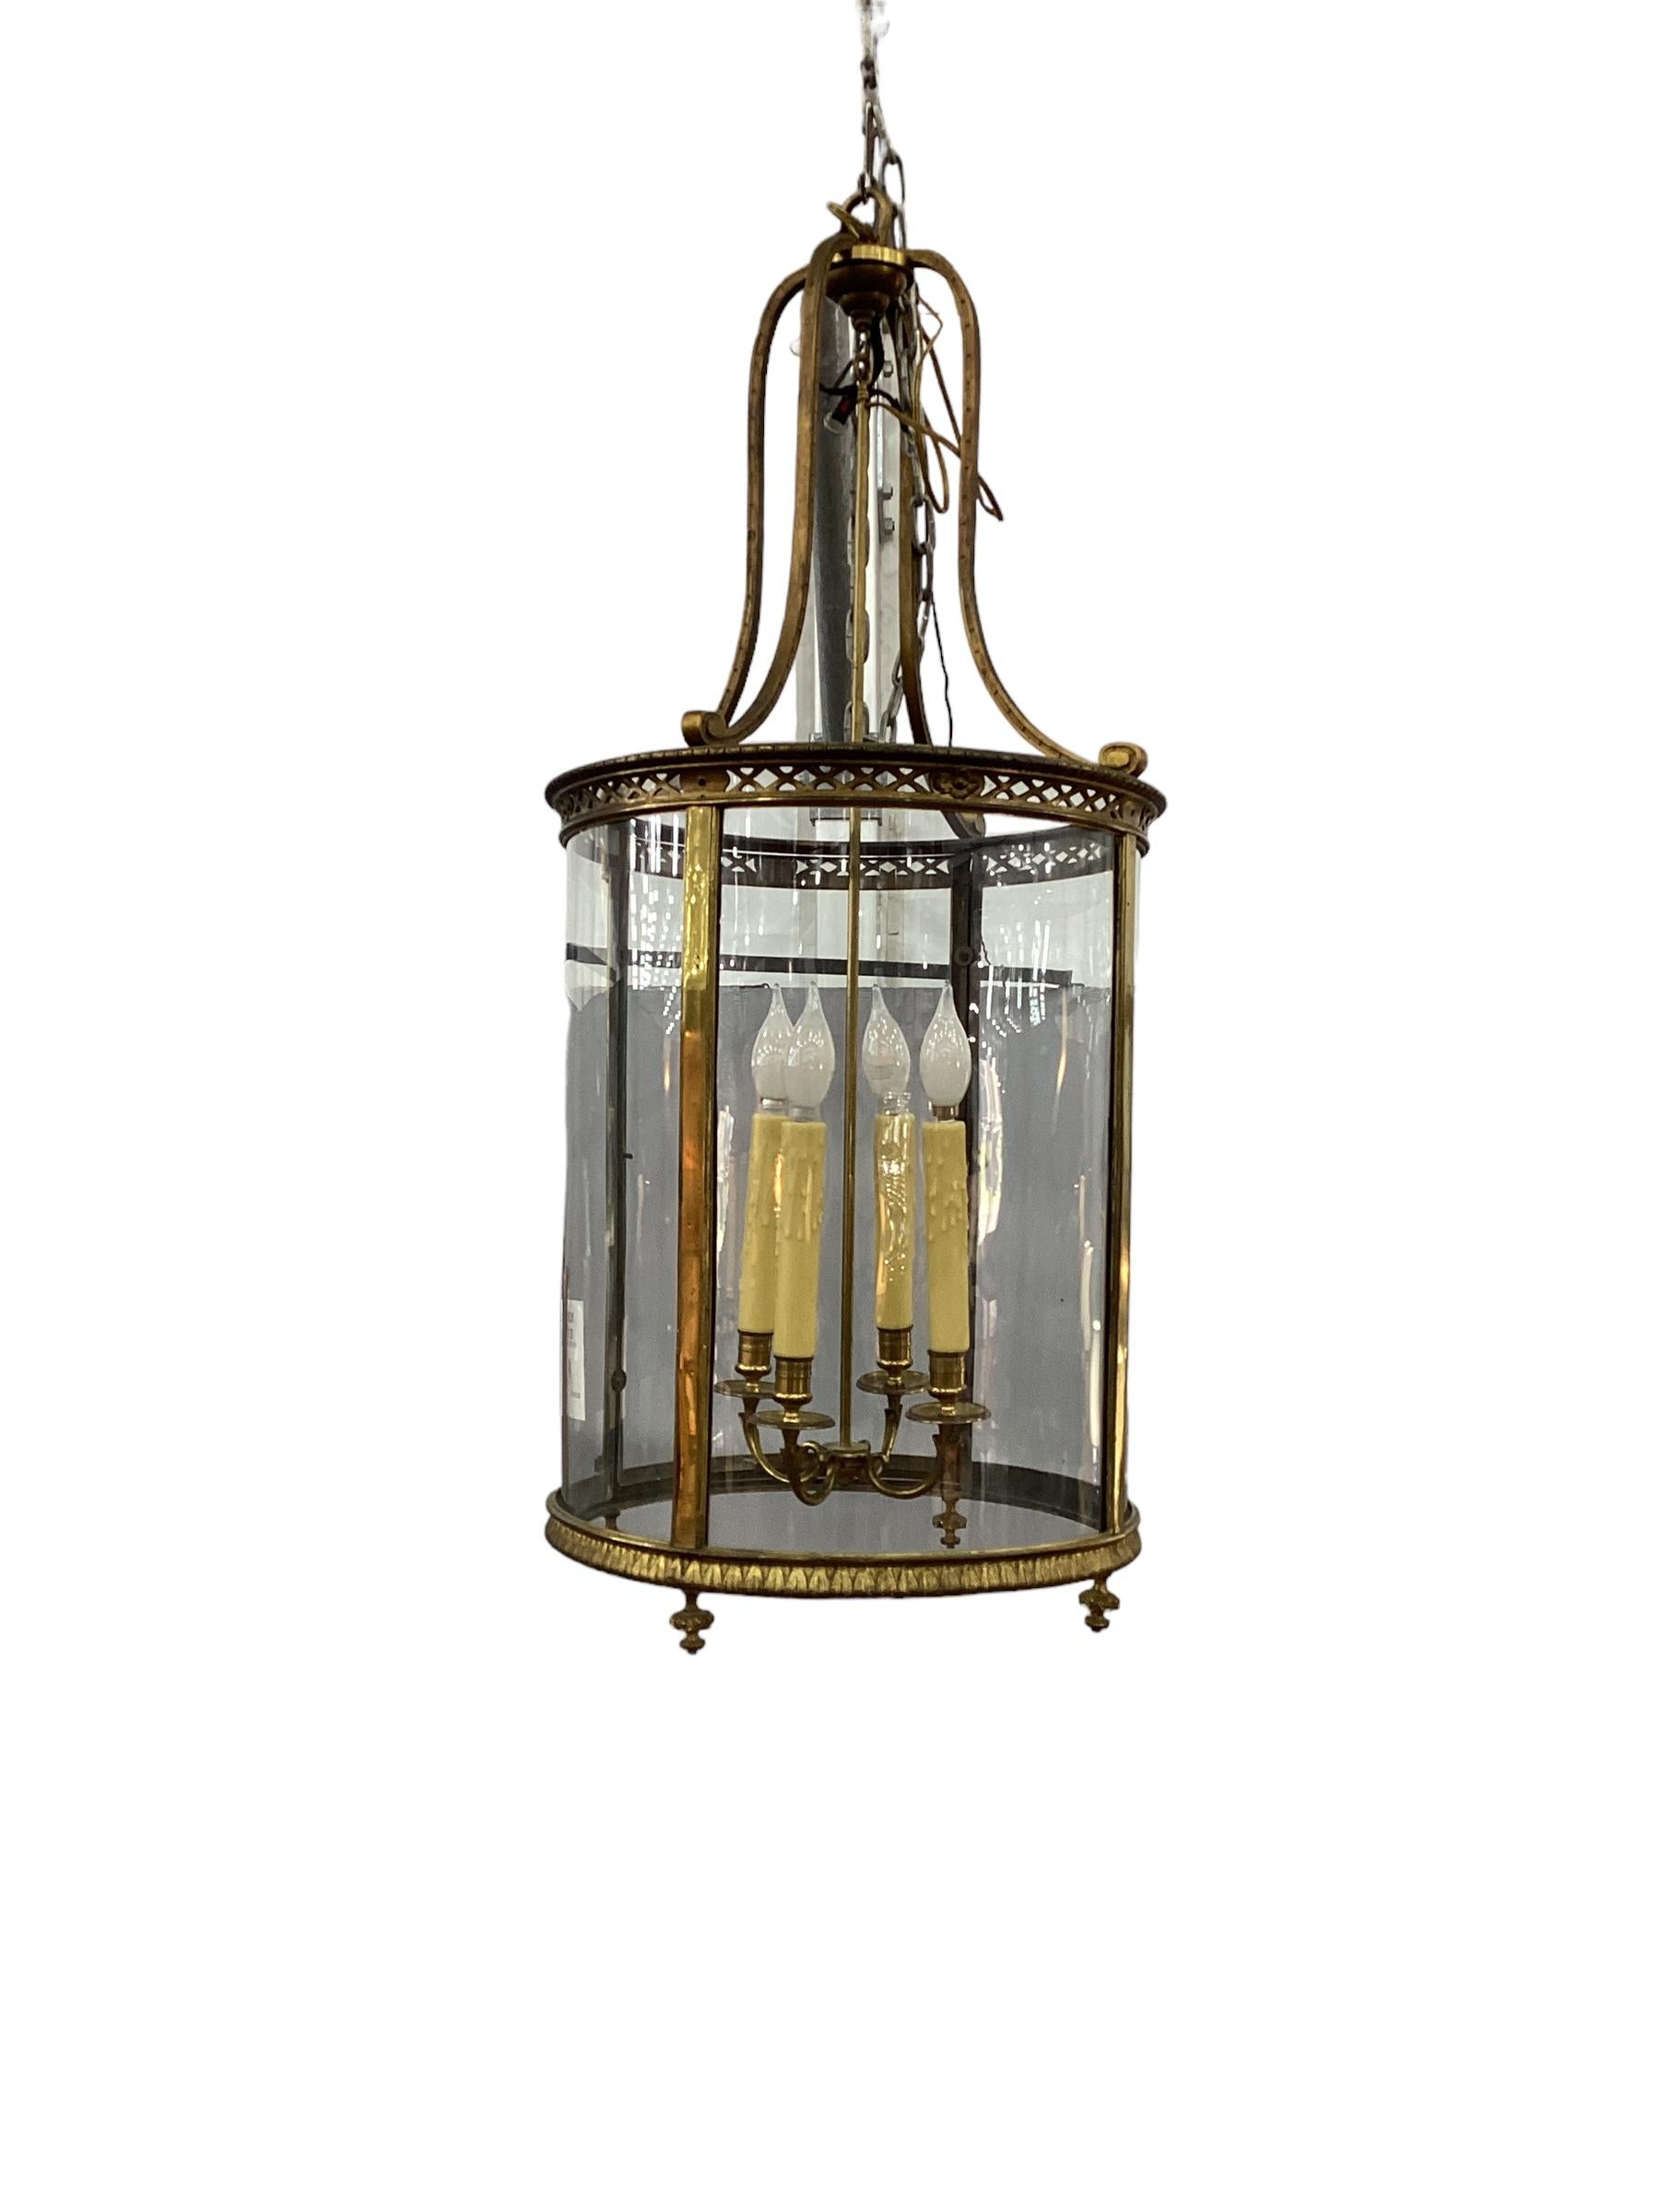 19th Century Gilt Bronze Regency Style Hall Lantern. Gilt bronze cage with curved glass panels, one panel opens up for changing light bulbs. Wired with four lights and in working condition. Each socket can accommodate up to a 60W light bulb.